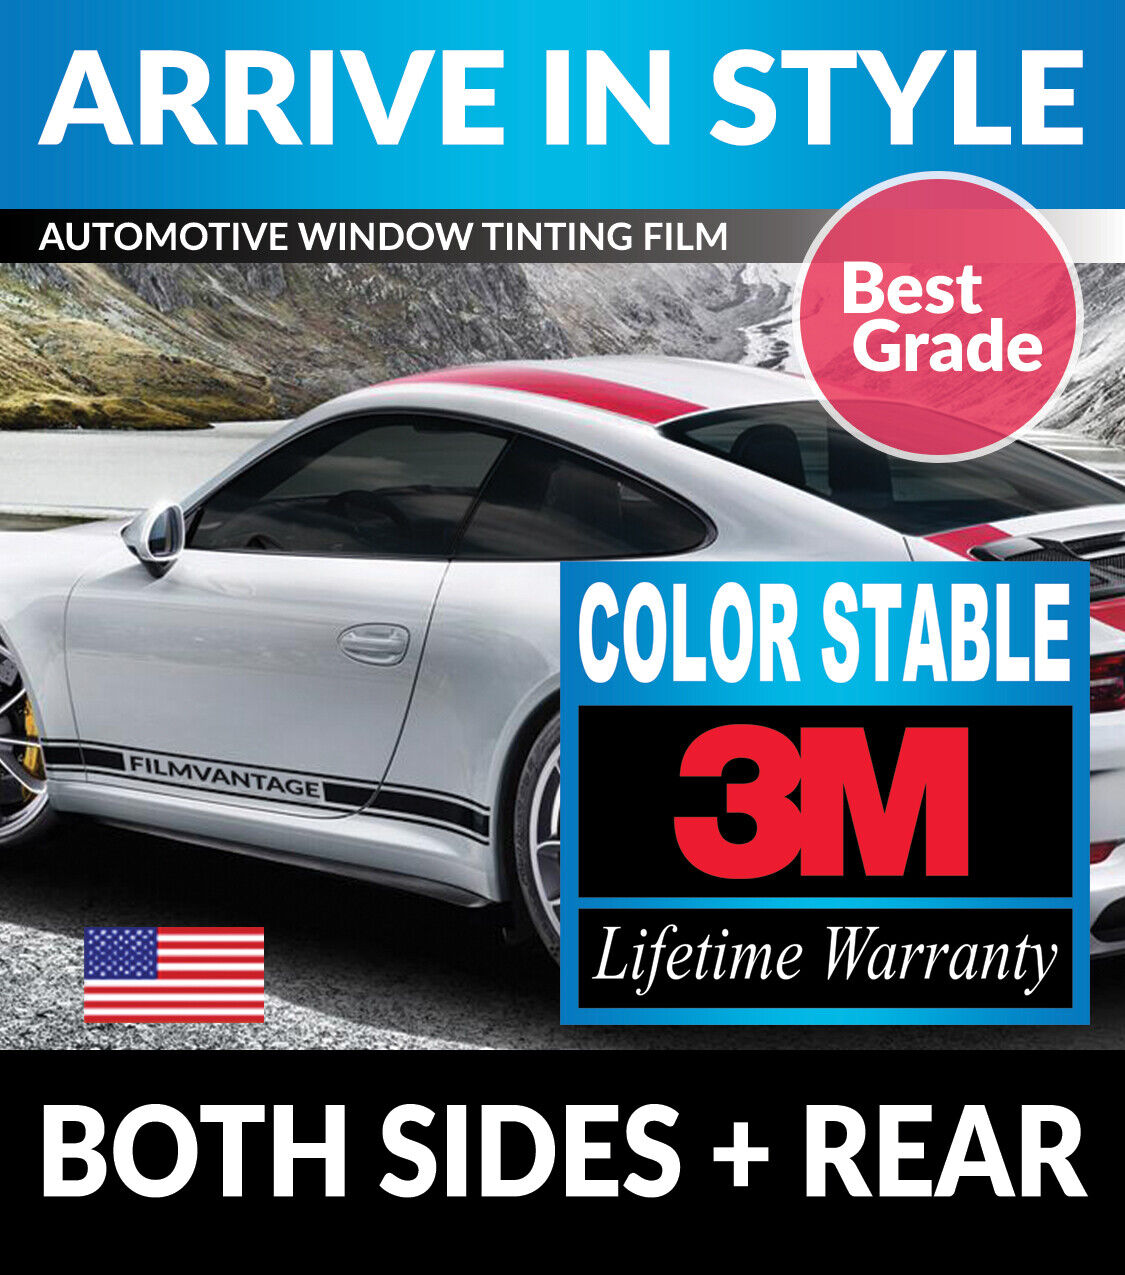 PRECUT WINDOW TINT W/ 3M COLOR STABLE FOR MERCEDES BENZ CL55 CL65 AMG 01-06